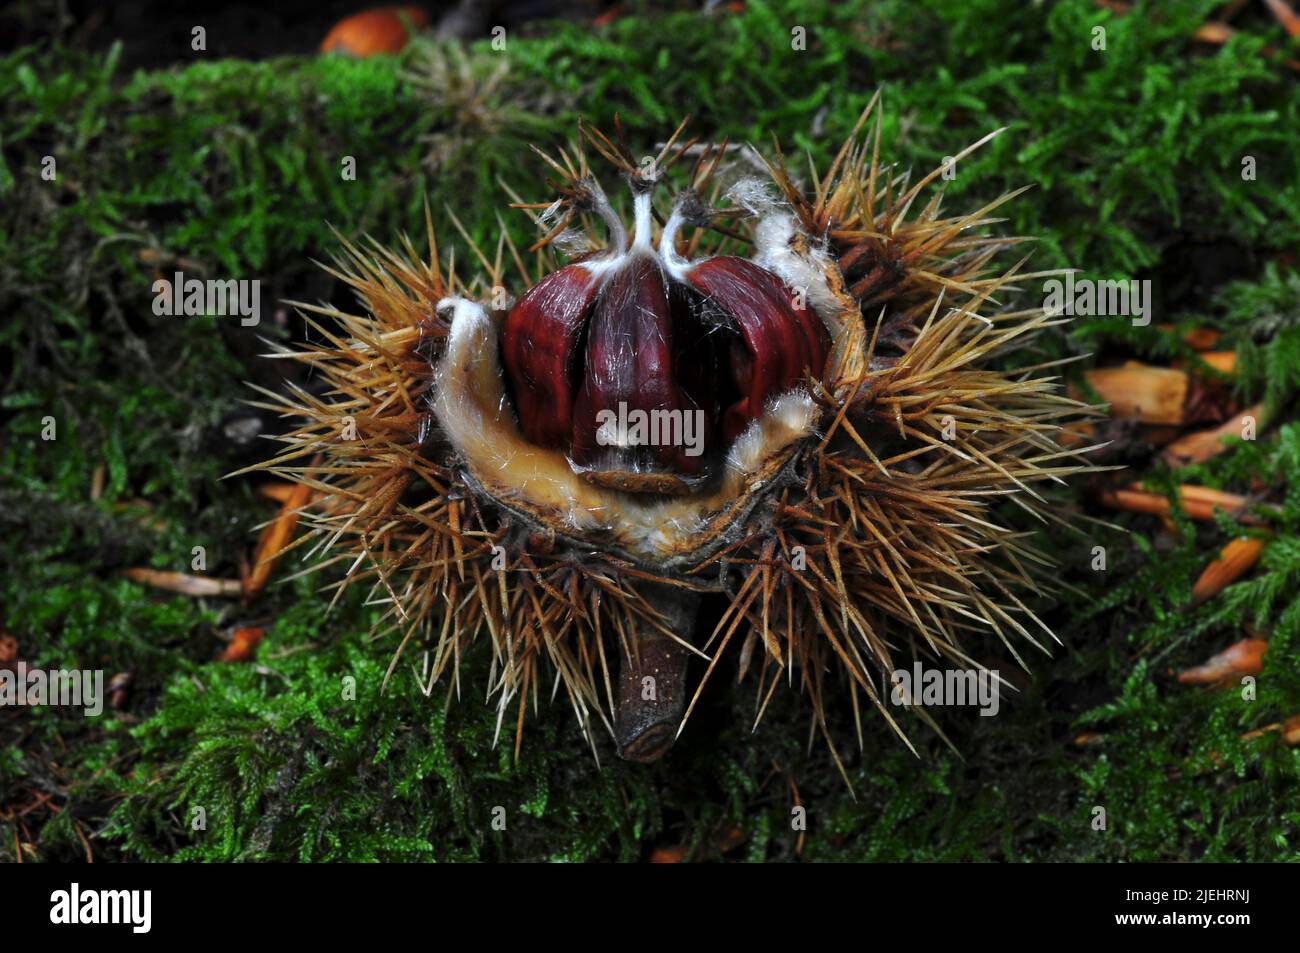 Sweet chestnuts fallen from tree on moss Stock Photo